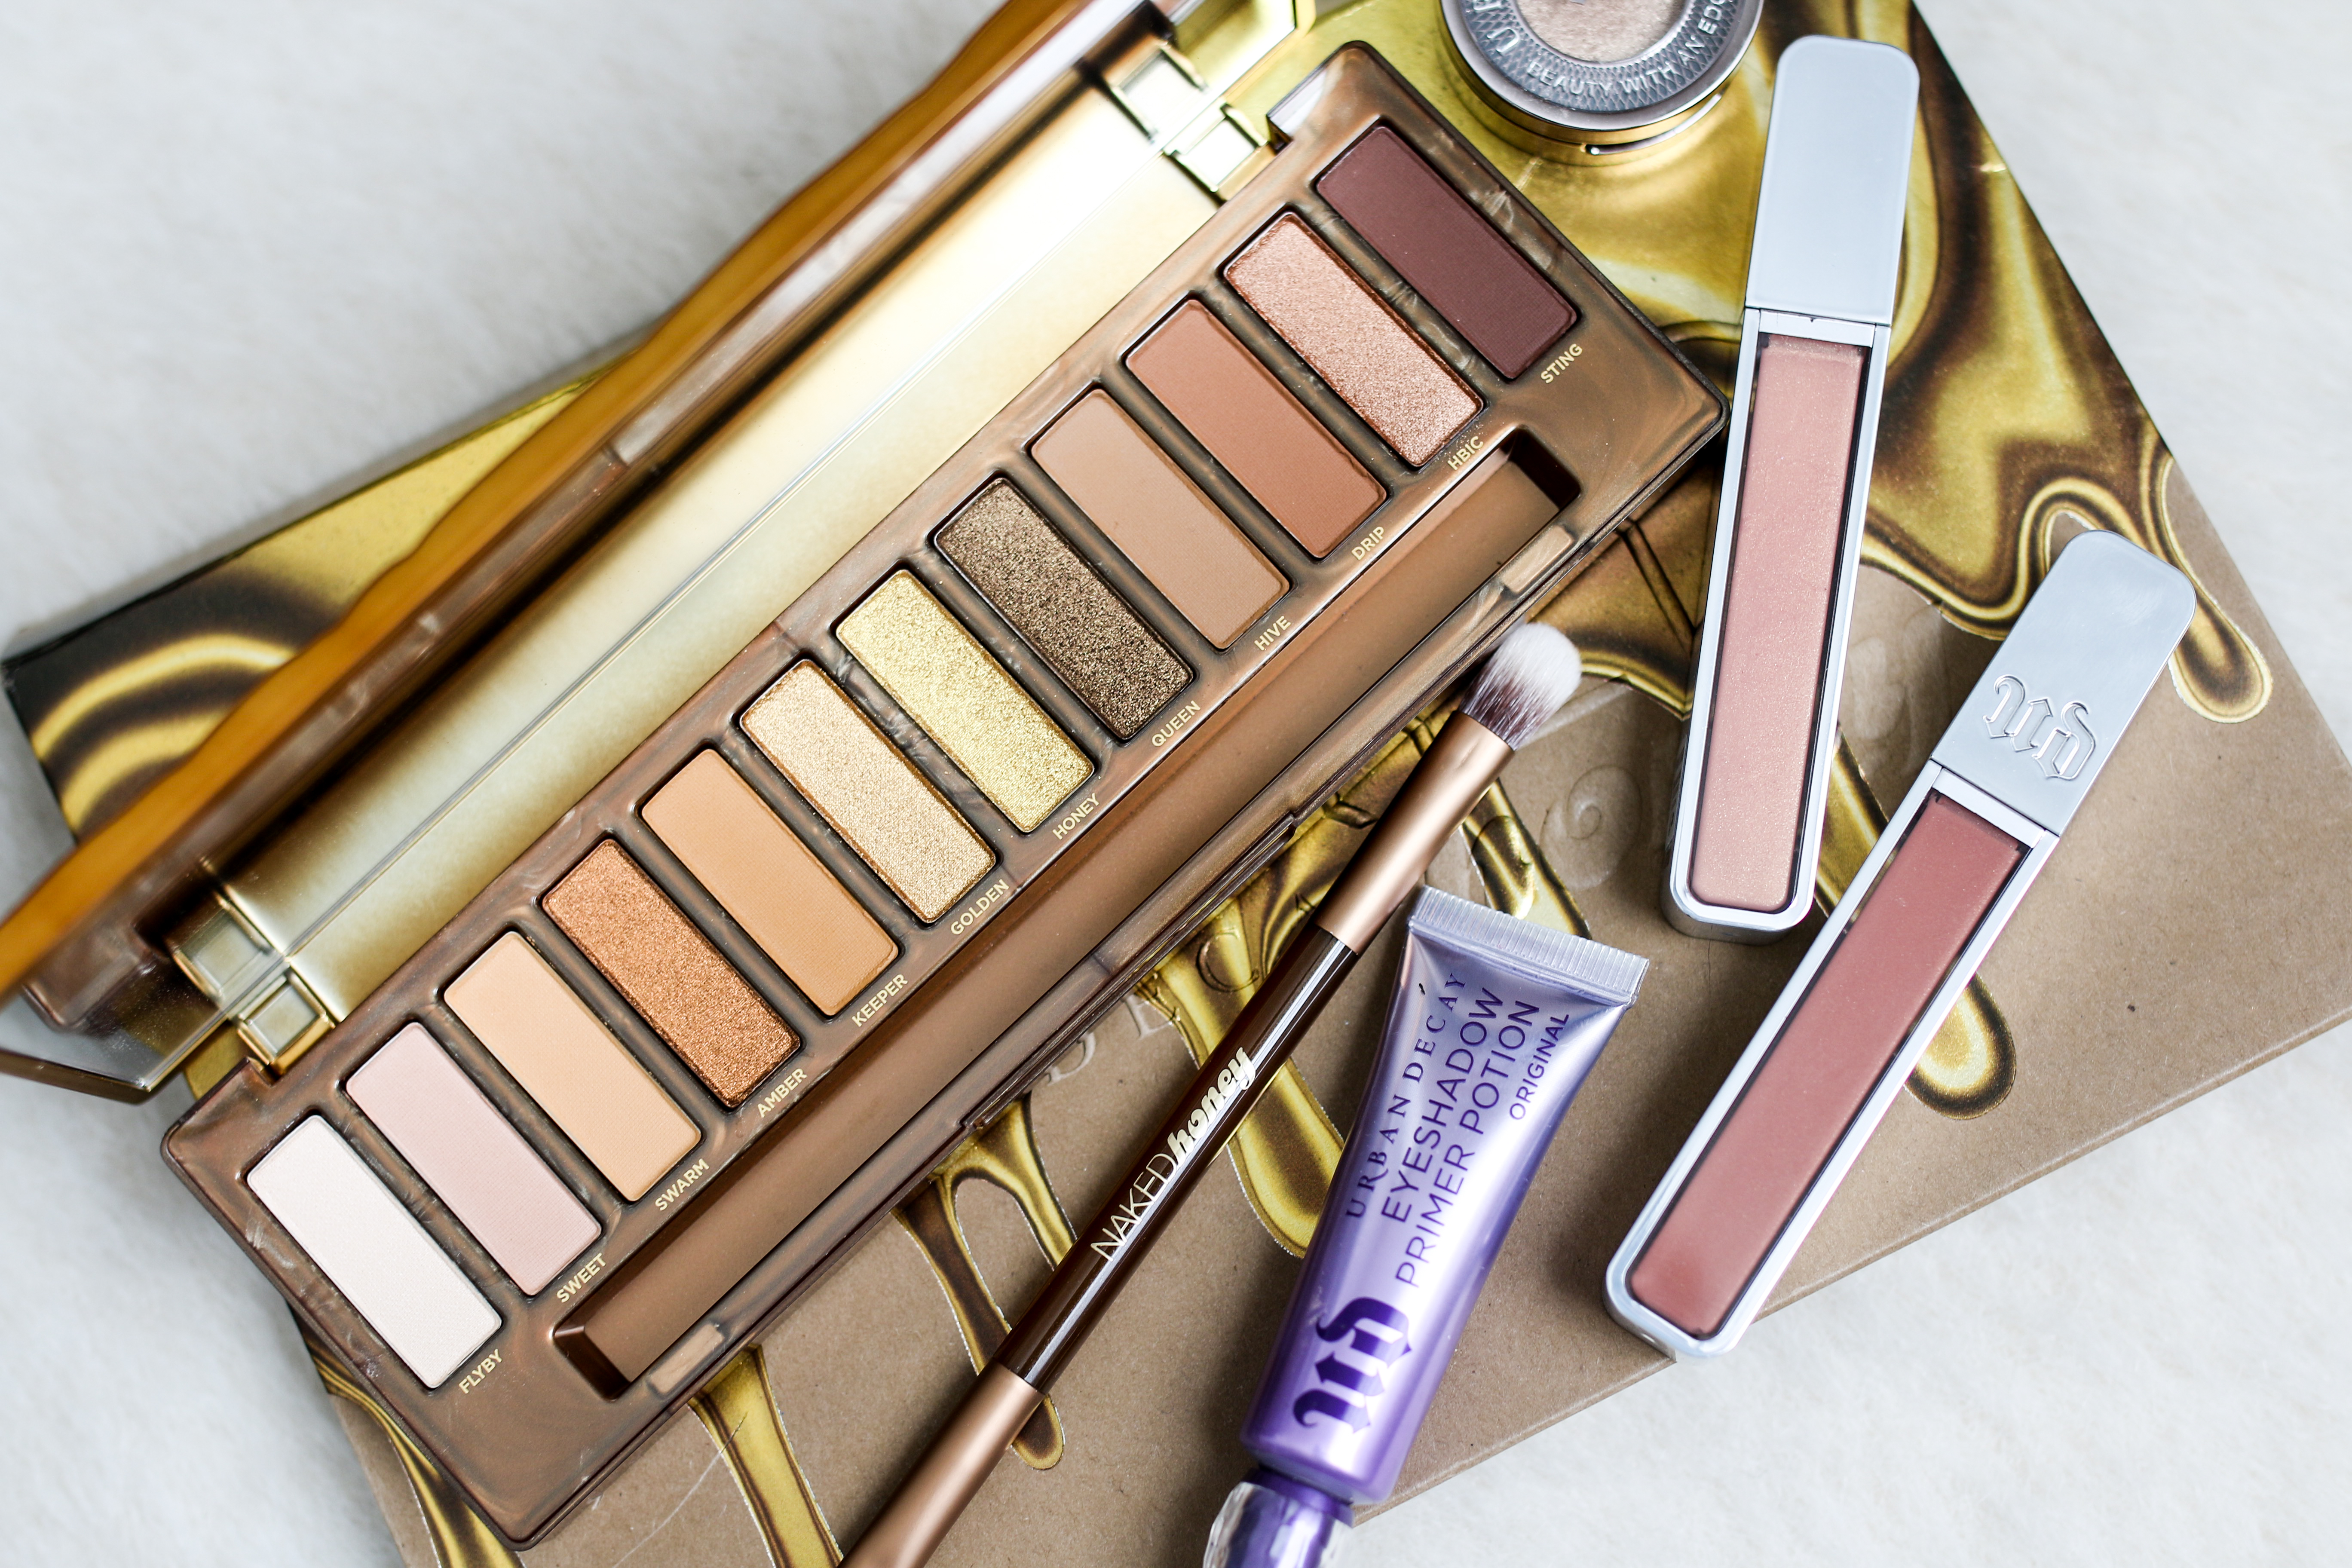 Its All Pretty to Me: Urban Decay Naked Palette Tutorial